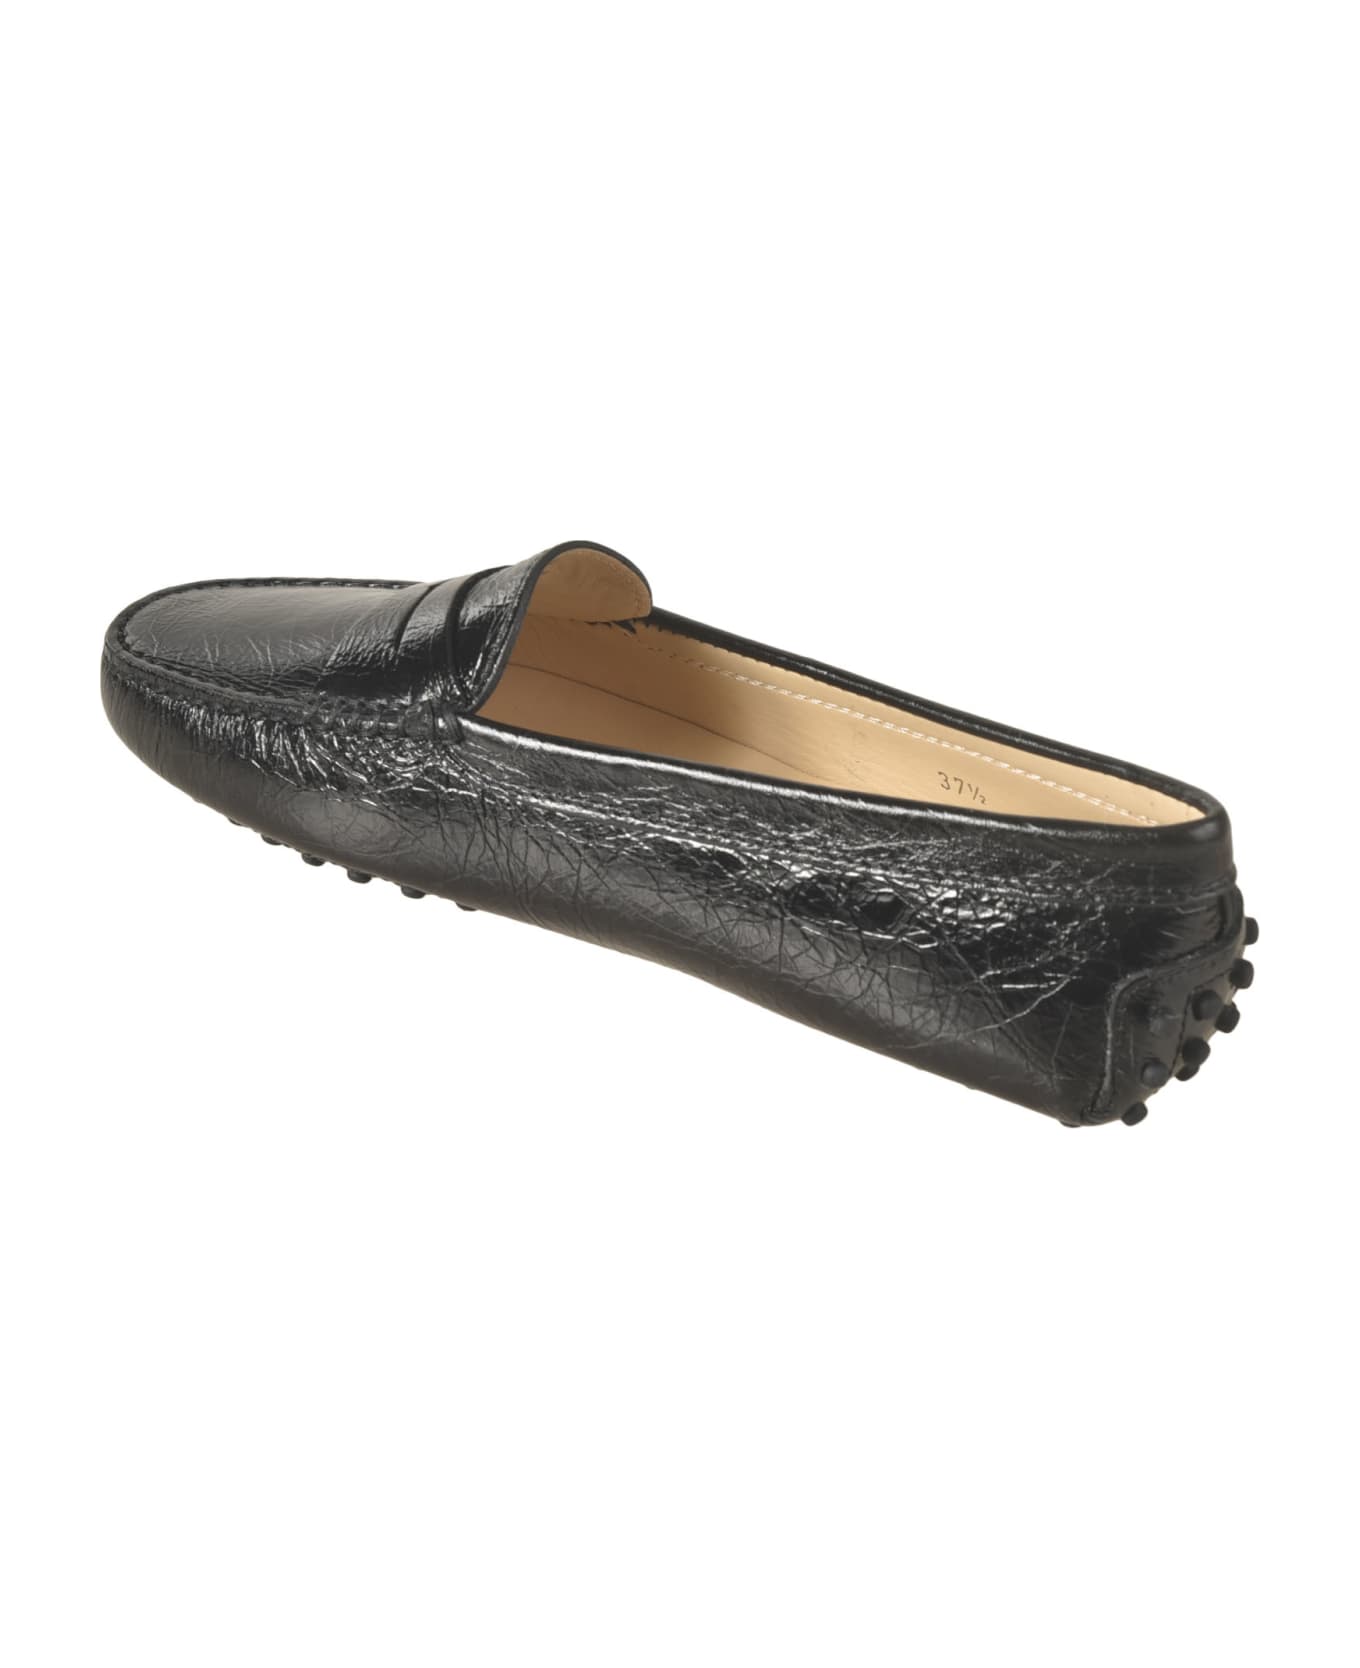 Tod's Gommini Loafers - Black